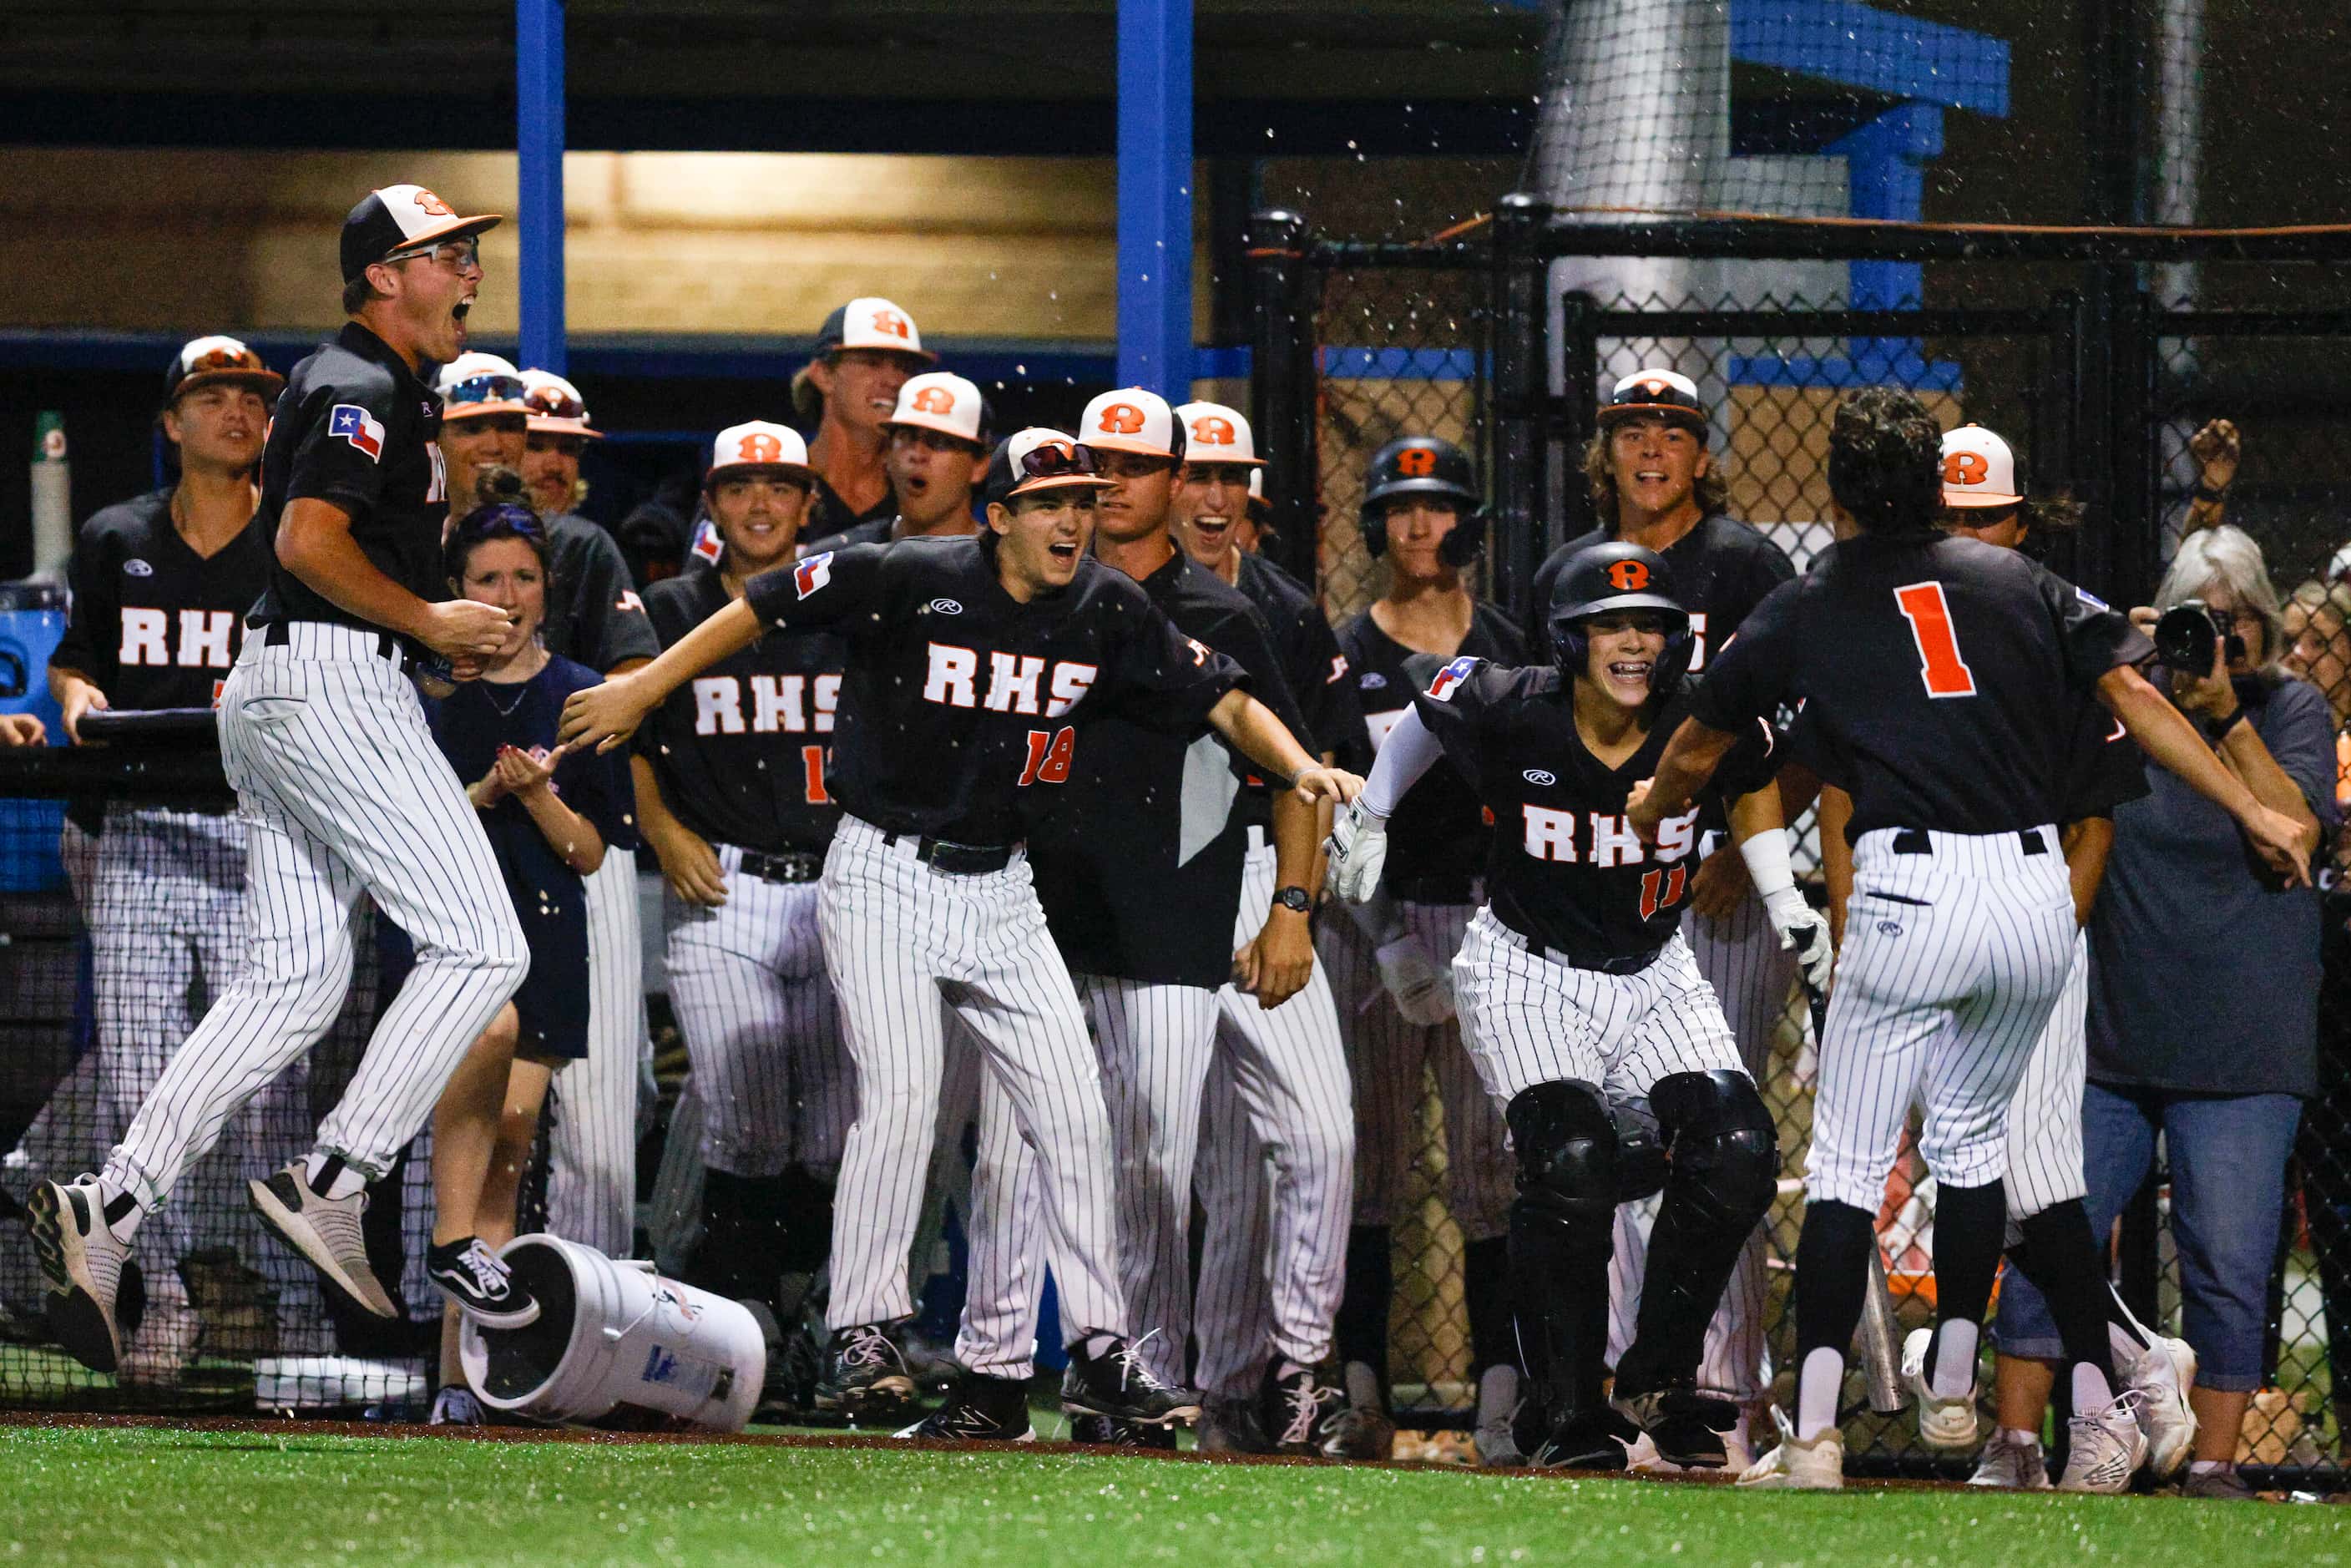 The Rockwall team celebrates a run by centerfielder Andrew Tellia (1) during the 8th inning...